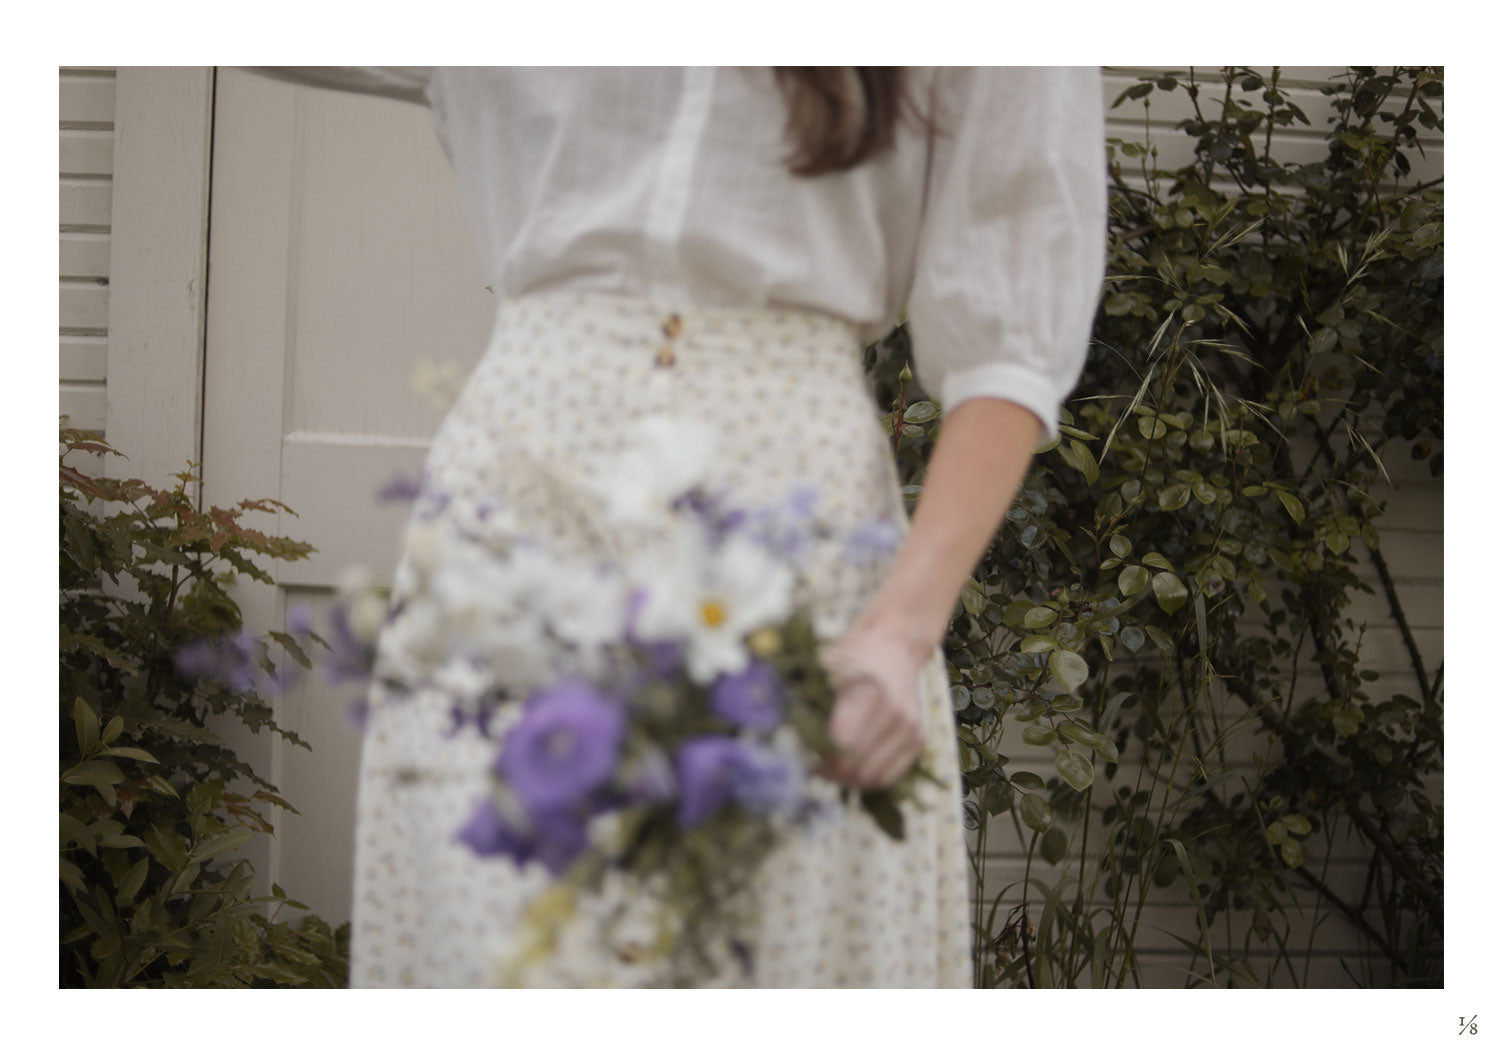 Adored Vintage “Find Her in the Garden” Spring Photo Story by Rodellee Bas